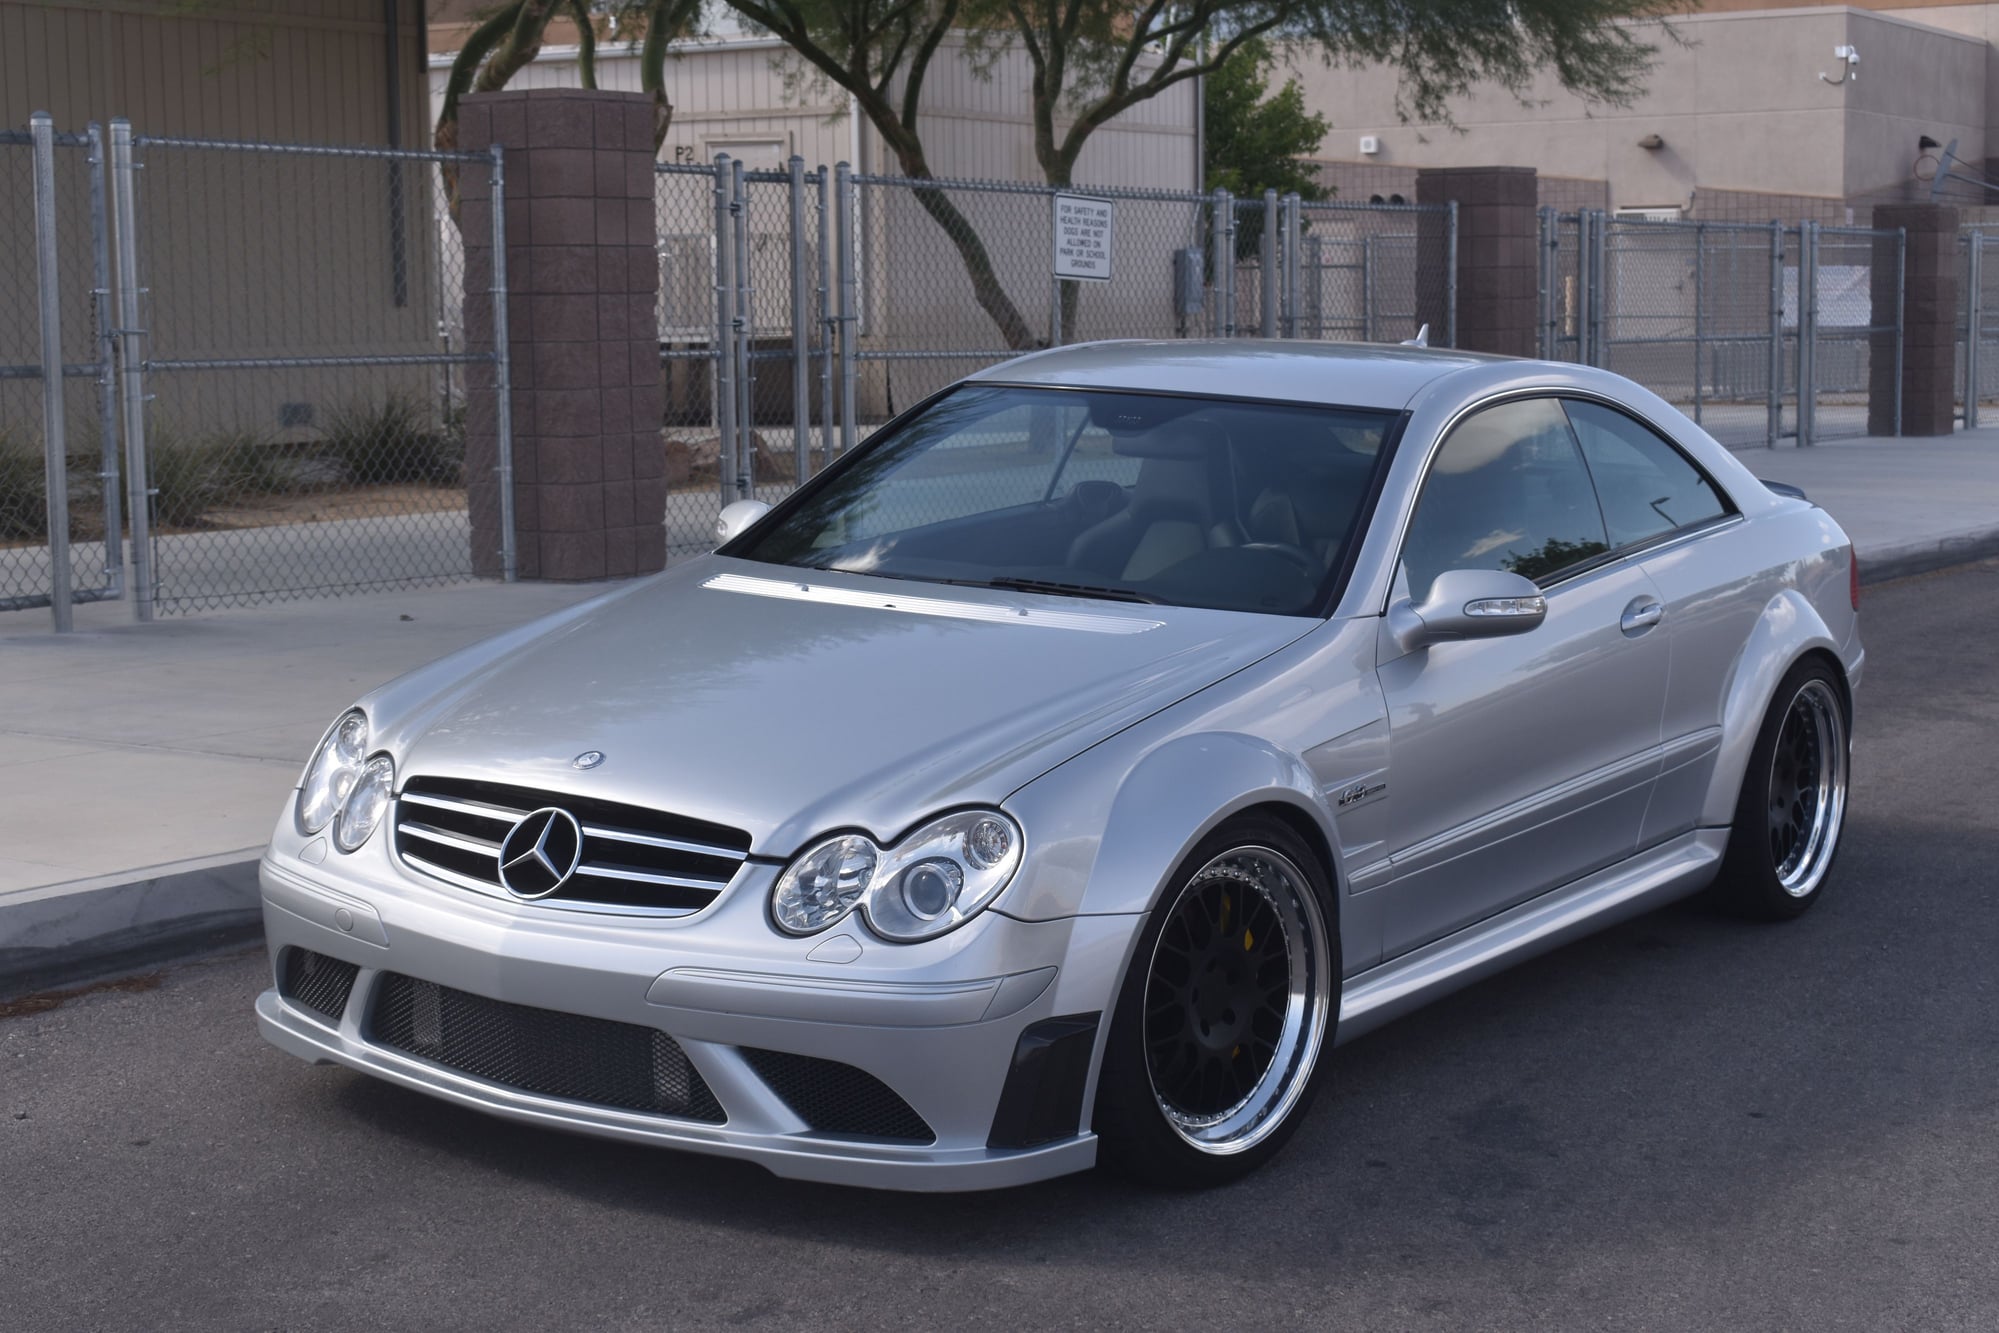 2008 Mercedes-Benz CLK63 AMG - FS: Weistec Supercharged CLK63 Black Series - Used - VIN WDBTJ77HX8F239545 - 42,700 Miles - 8 cyl - 2WD - Automatic - Coupe - Silver - Las Vegas, NV 89141, United States